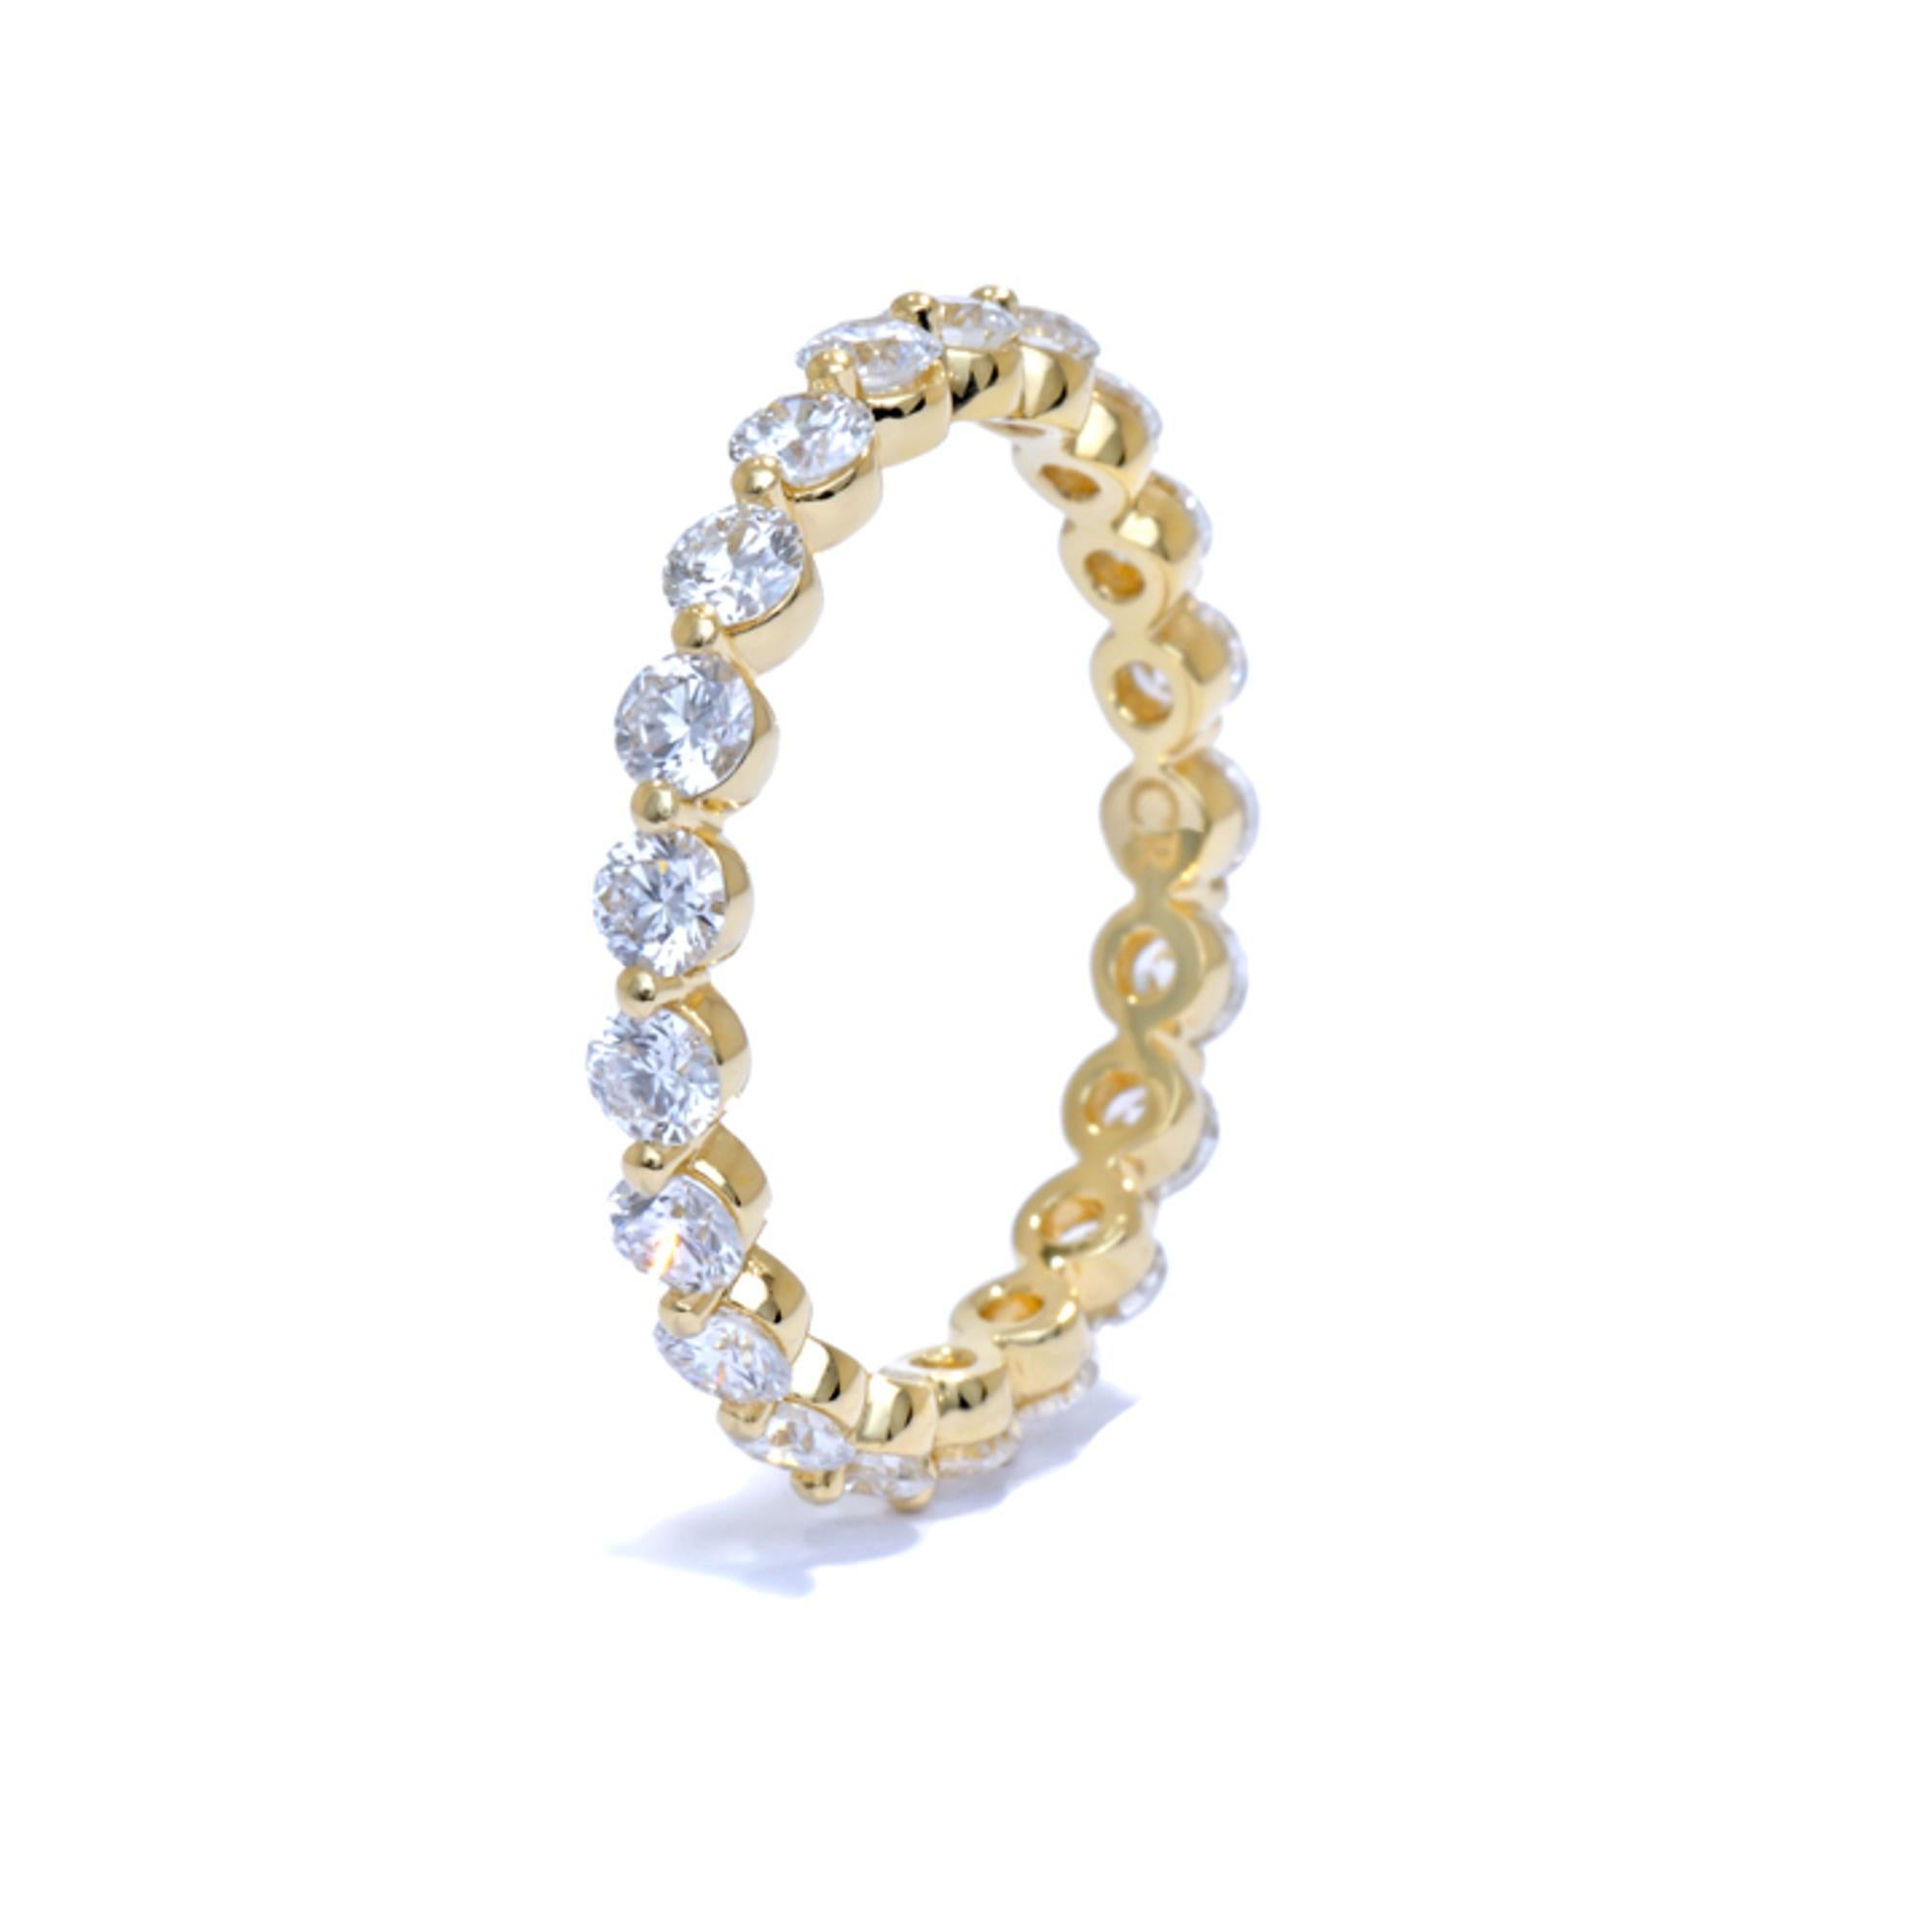 This style is available in variety of carat weights but this particular listing is for 0.75cts full circle diamond eternity band in 14k yellow gold. Measuring approx. 2.3mm wide this ring will sit flush with most of engagement ring complimenting any